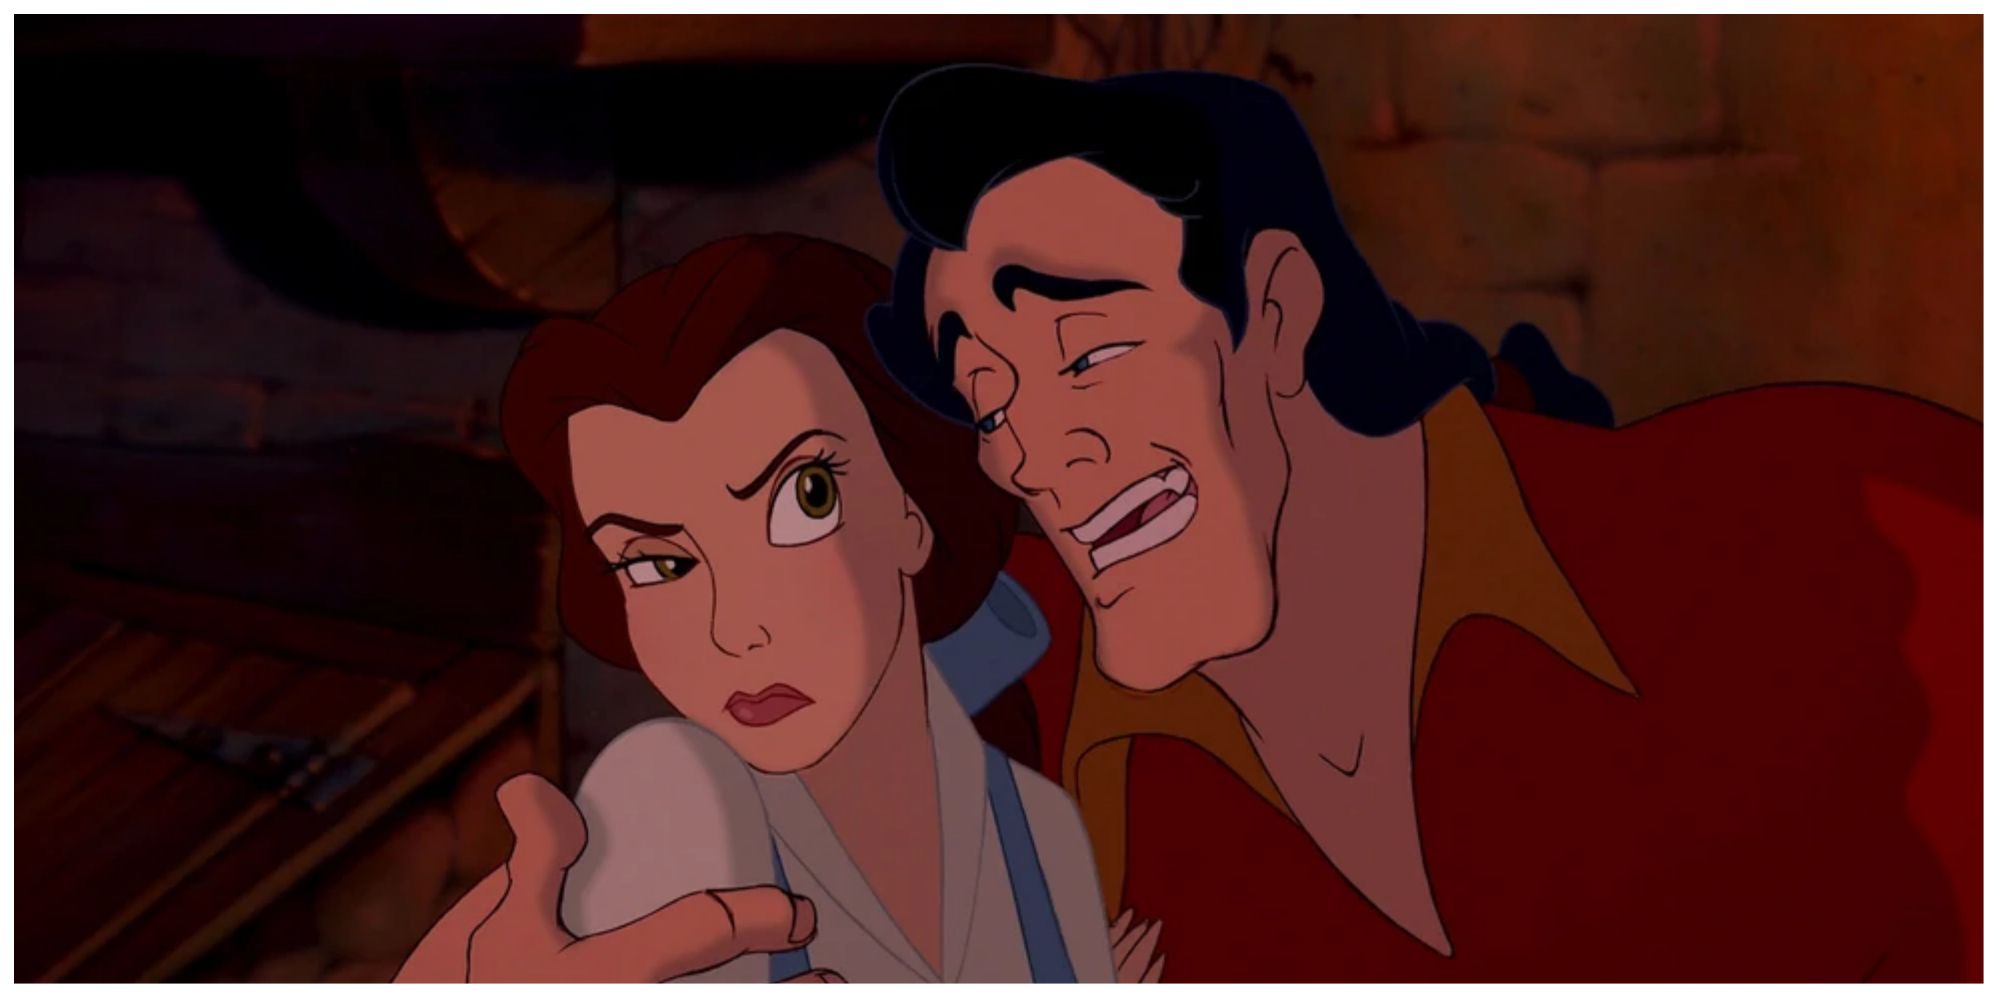 Gaston Legume bothers Belle from Beauty and the Beast